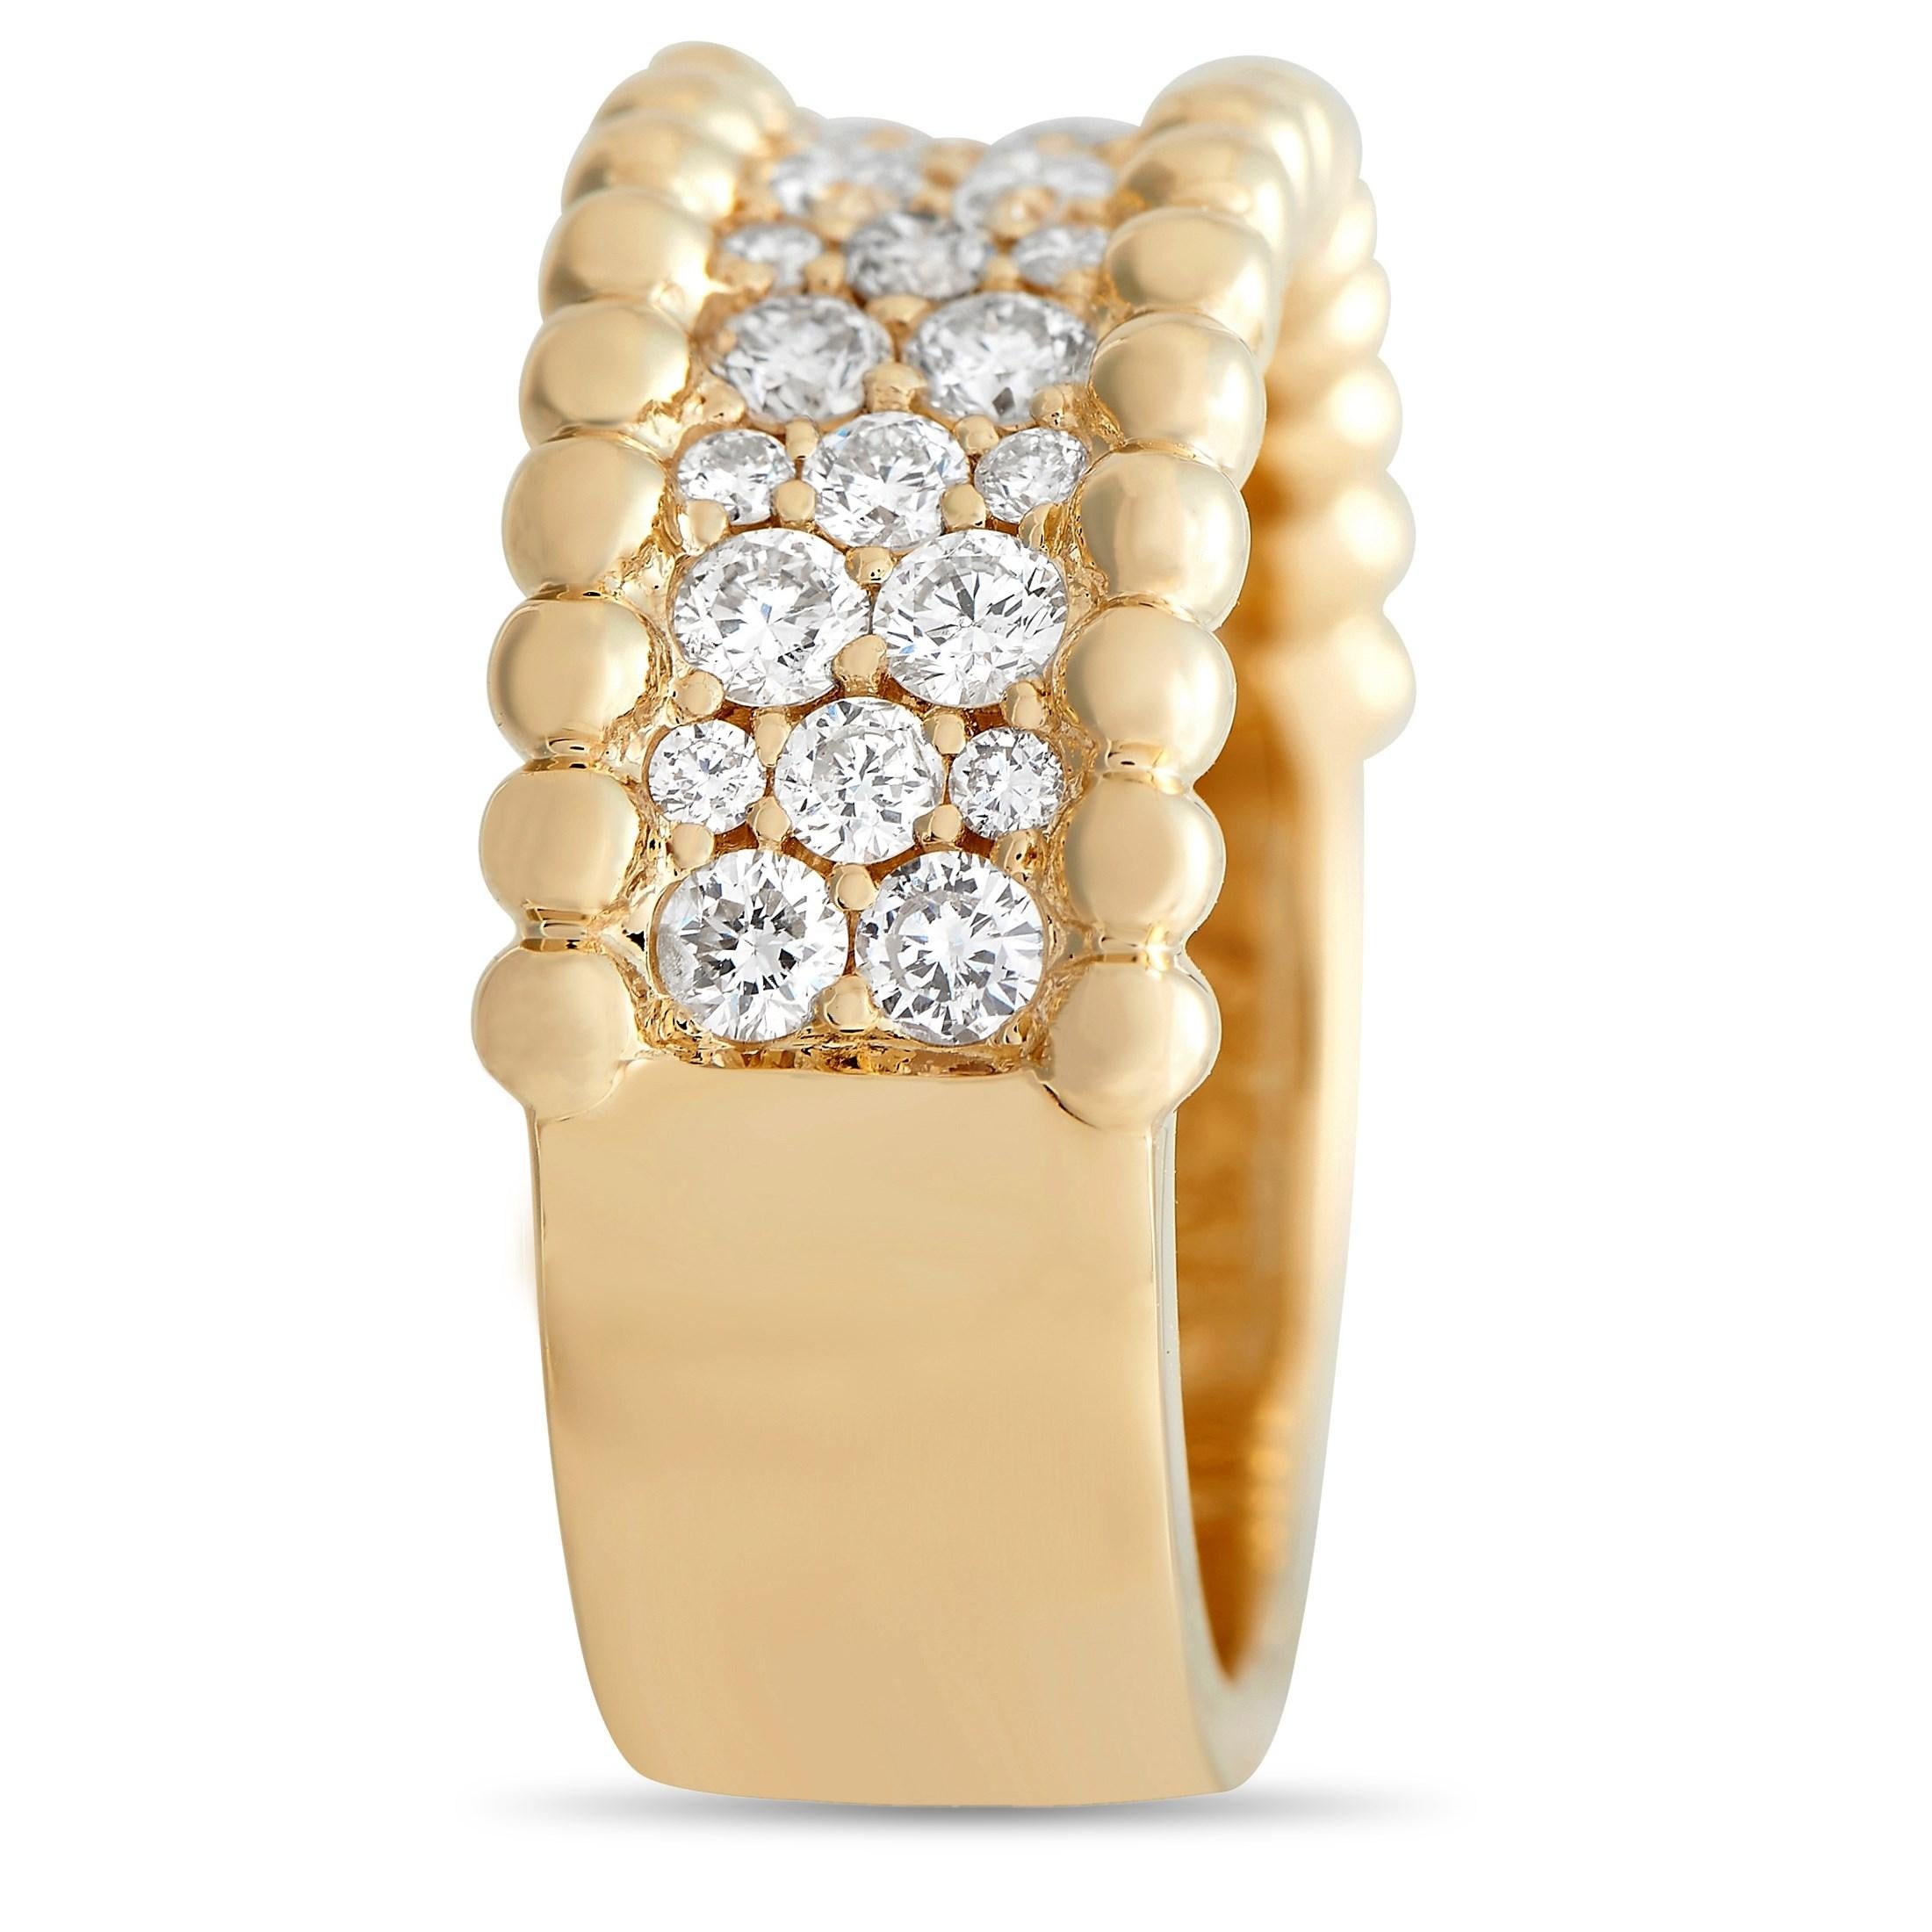 This luxurious ring will never go out of style. A textured setting made from 18K Yellow Gold provides the perfect backdrop for this piece’s stunning arrangement of diamonds, which together possess a total weight of 1.03 carats. Incredibly elegant,